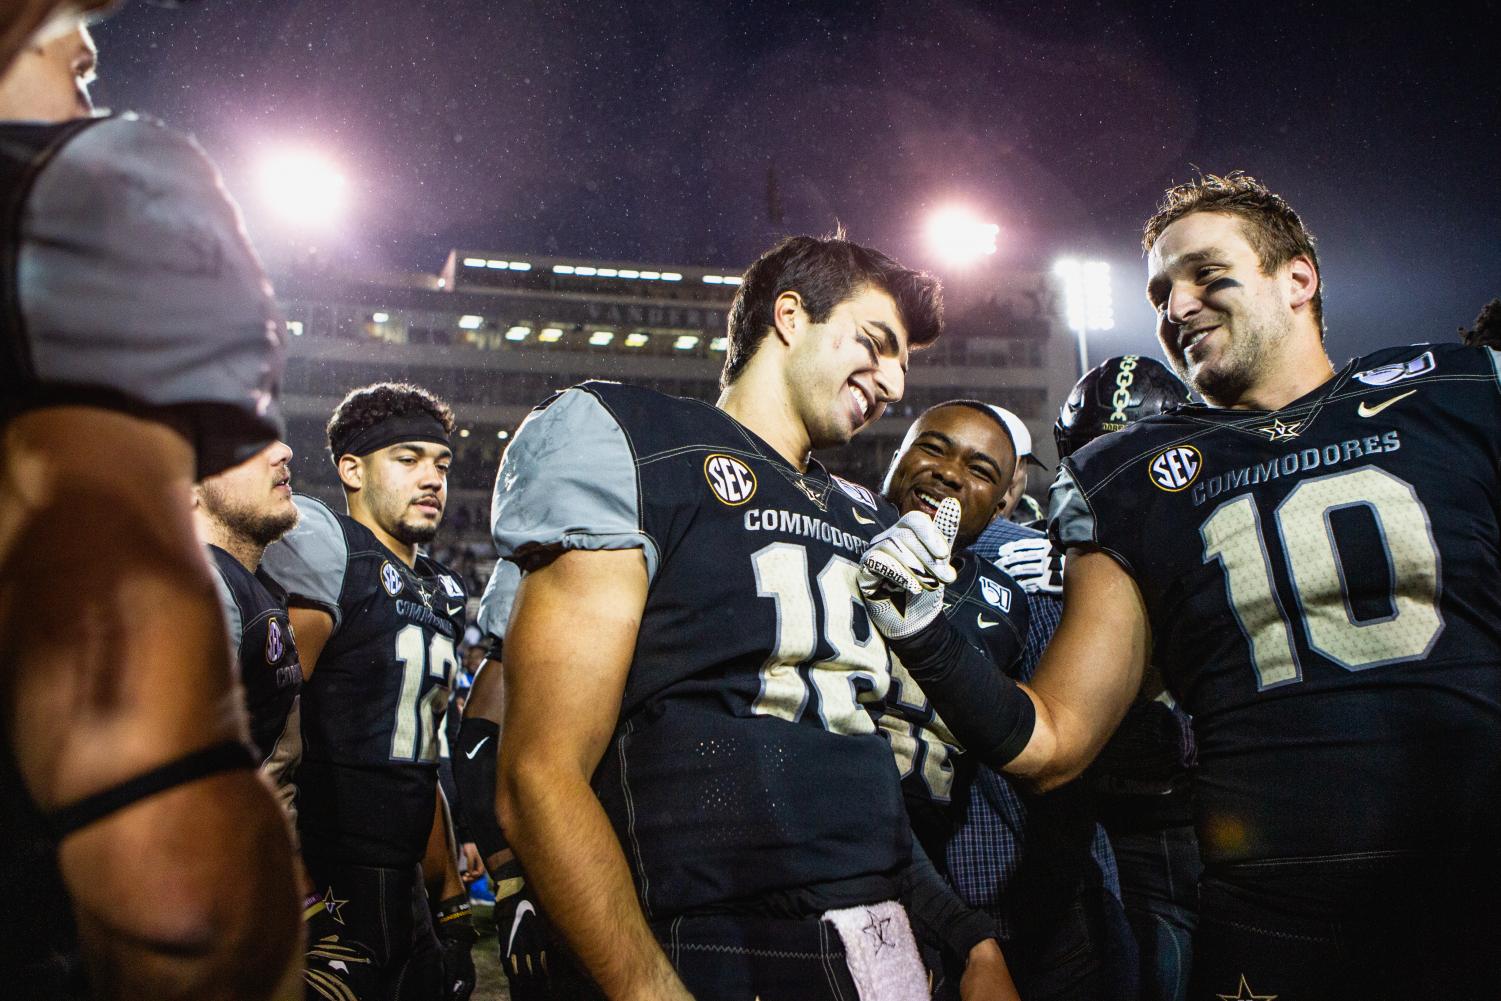 Vanderbilt upsets Mizzou for Homecoming Weekend on Saturday, October 19, 2019. (Photo by Hunter Long)